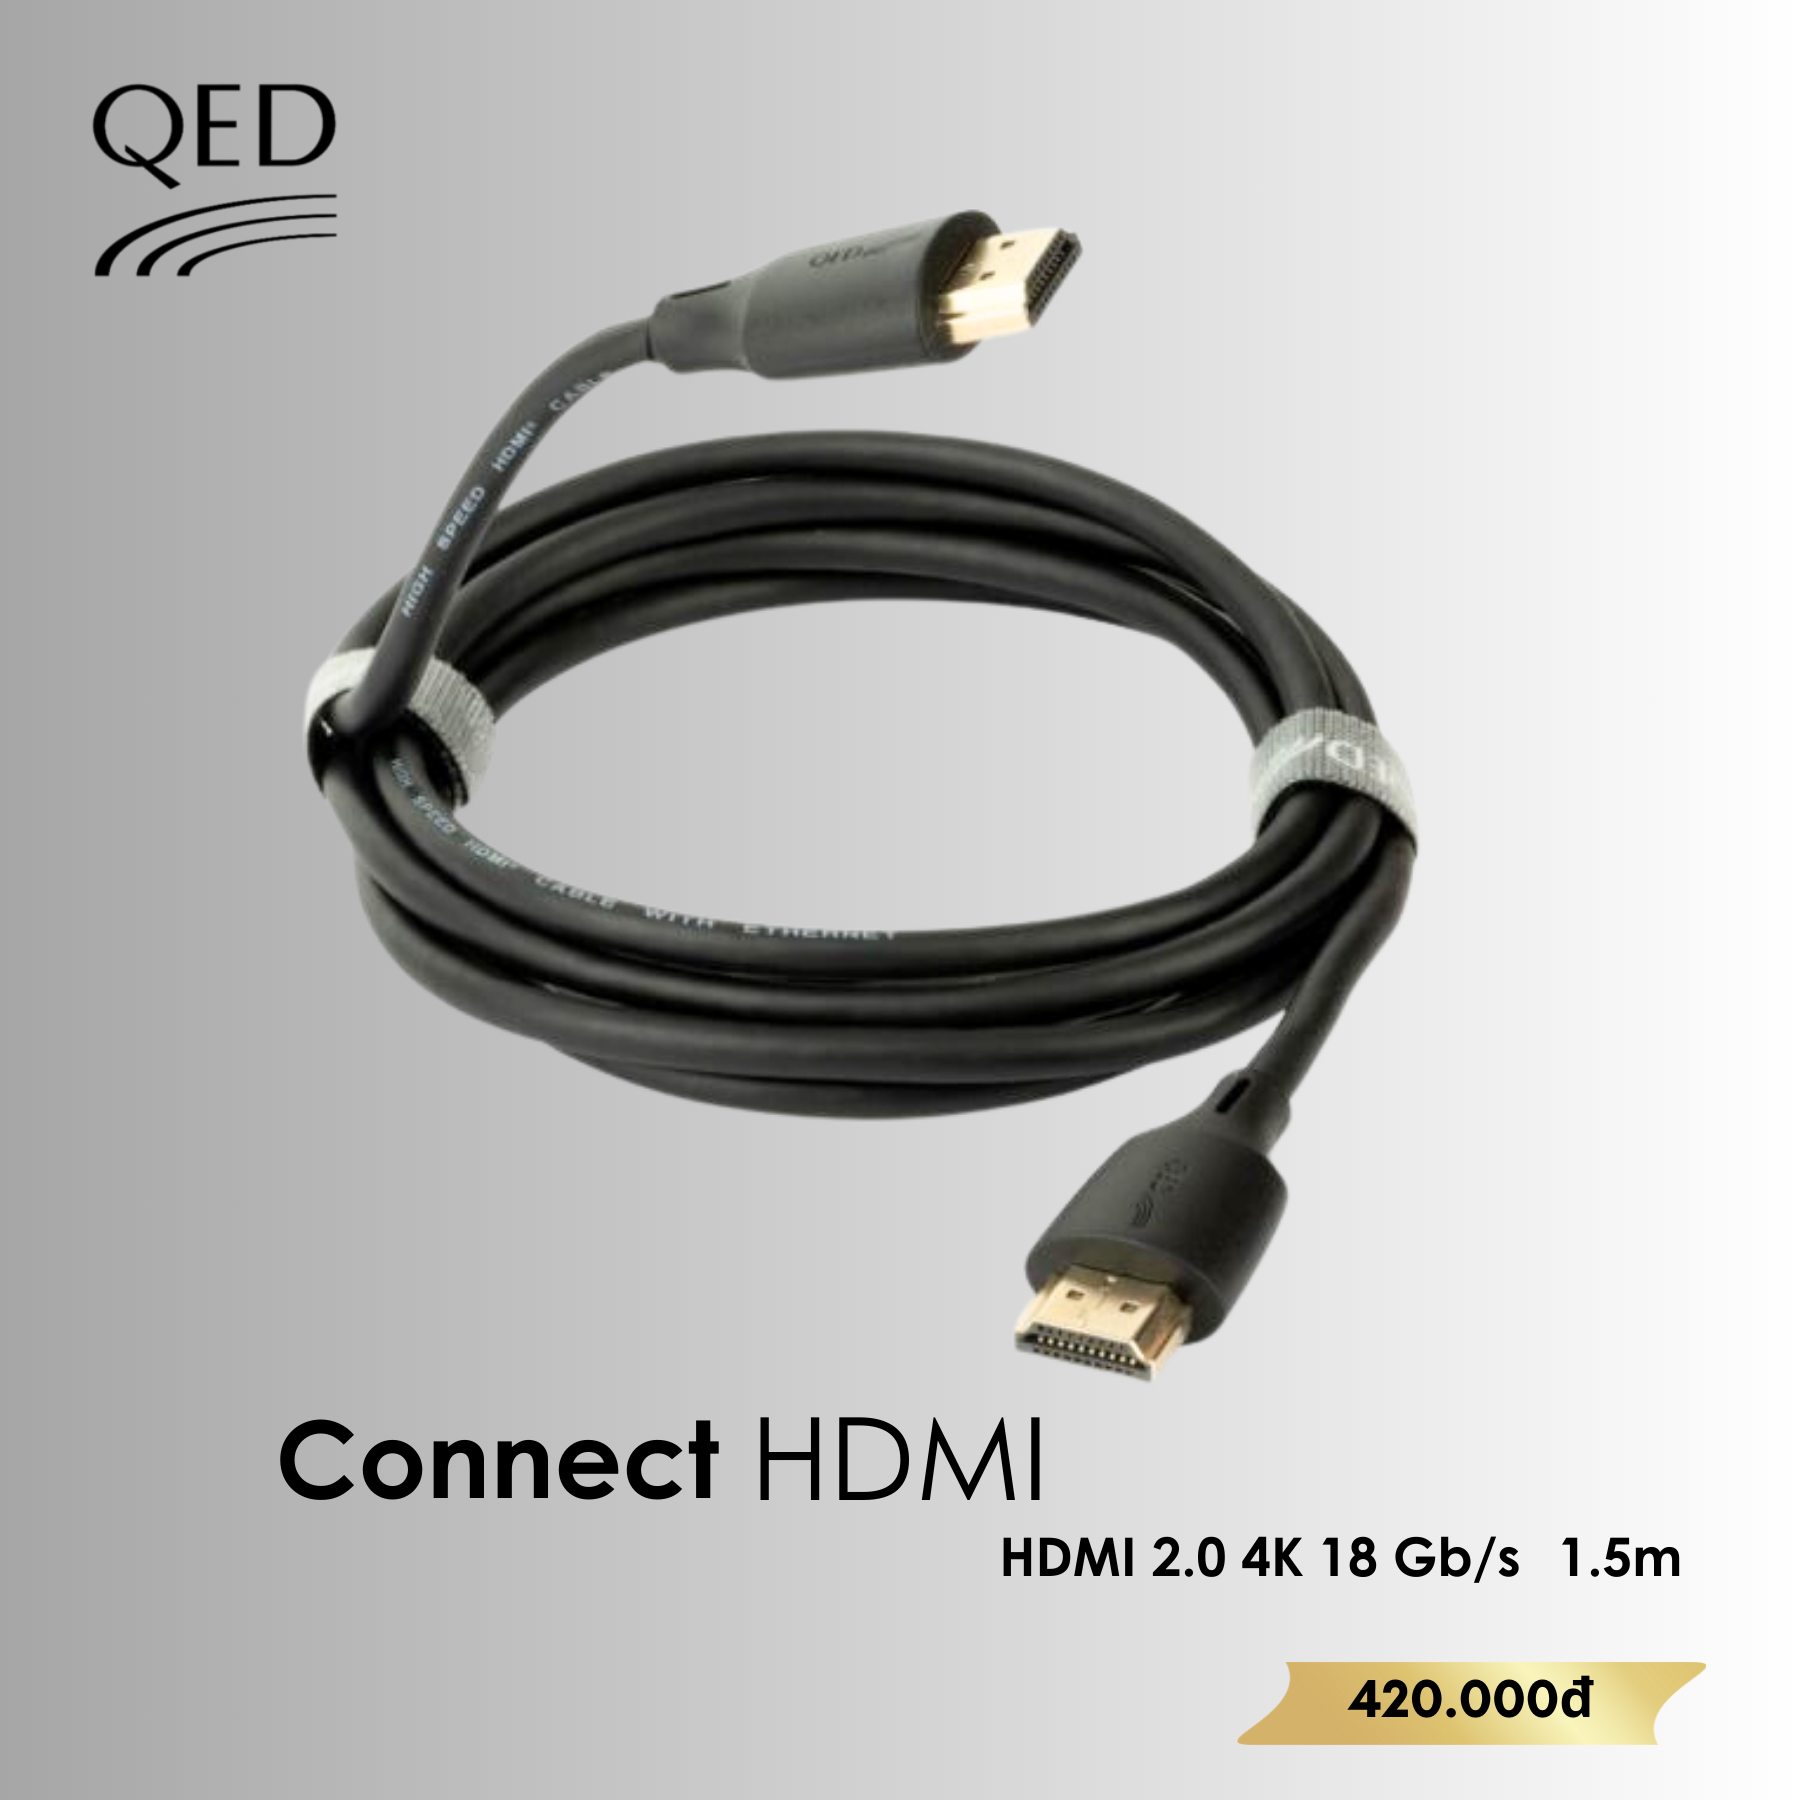 CONNECT HDMI Cable